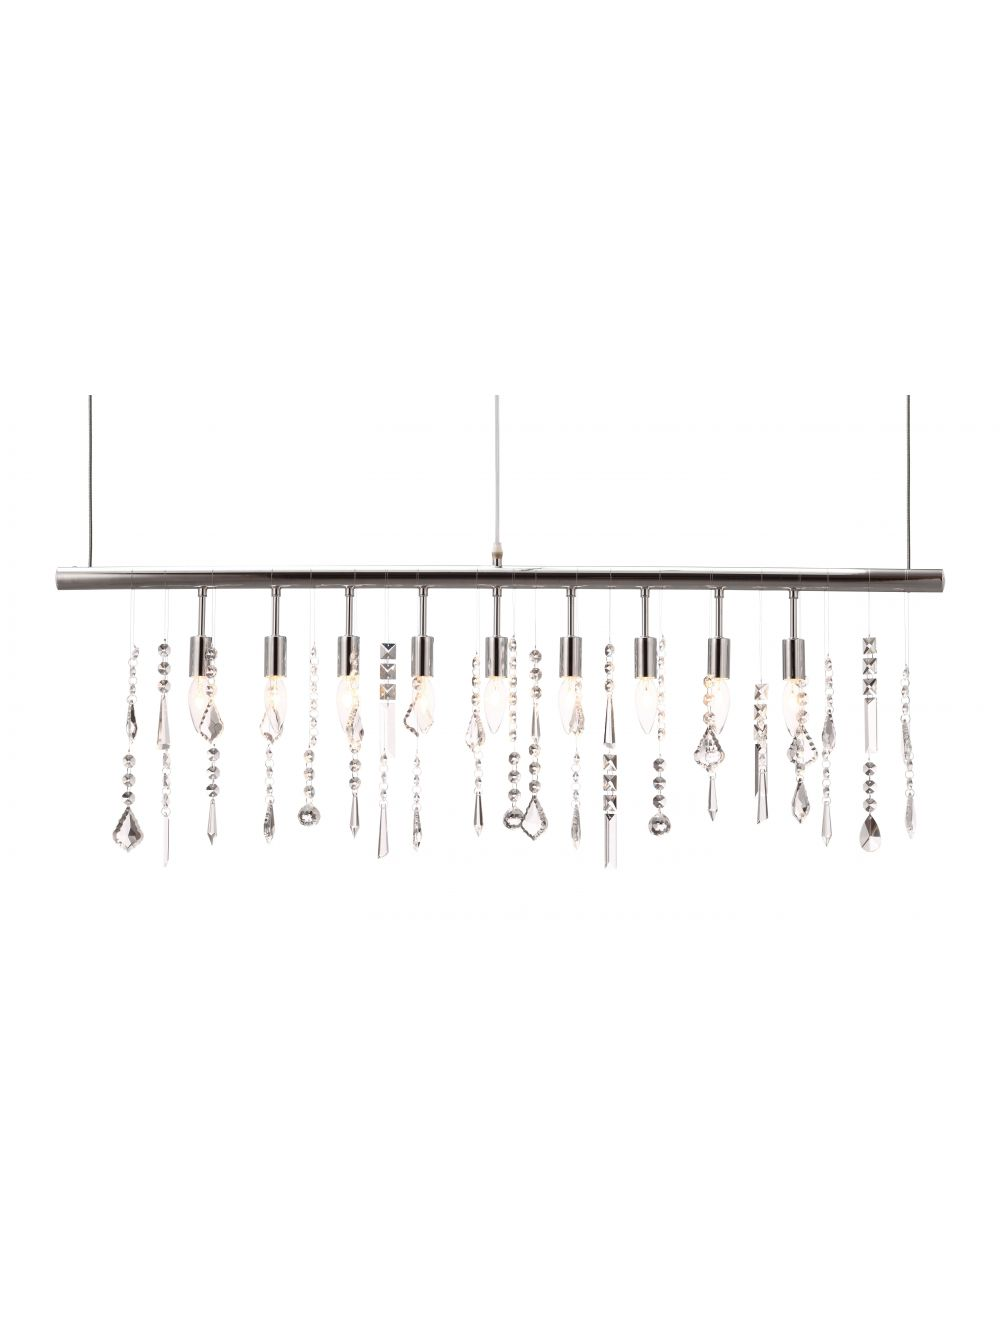 Boho Aesthetic "Modern Glam Icicle Chandelier" | Biophilic Design Airbnb Decor Furniture 